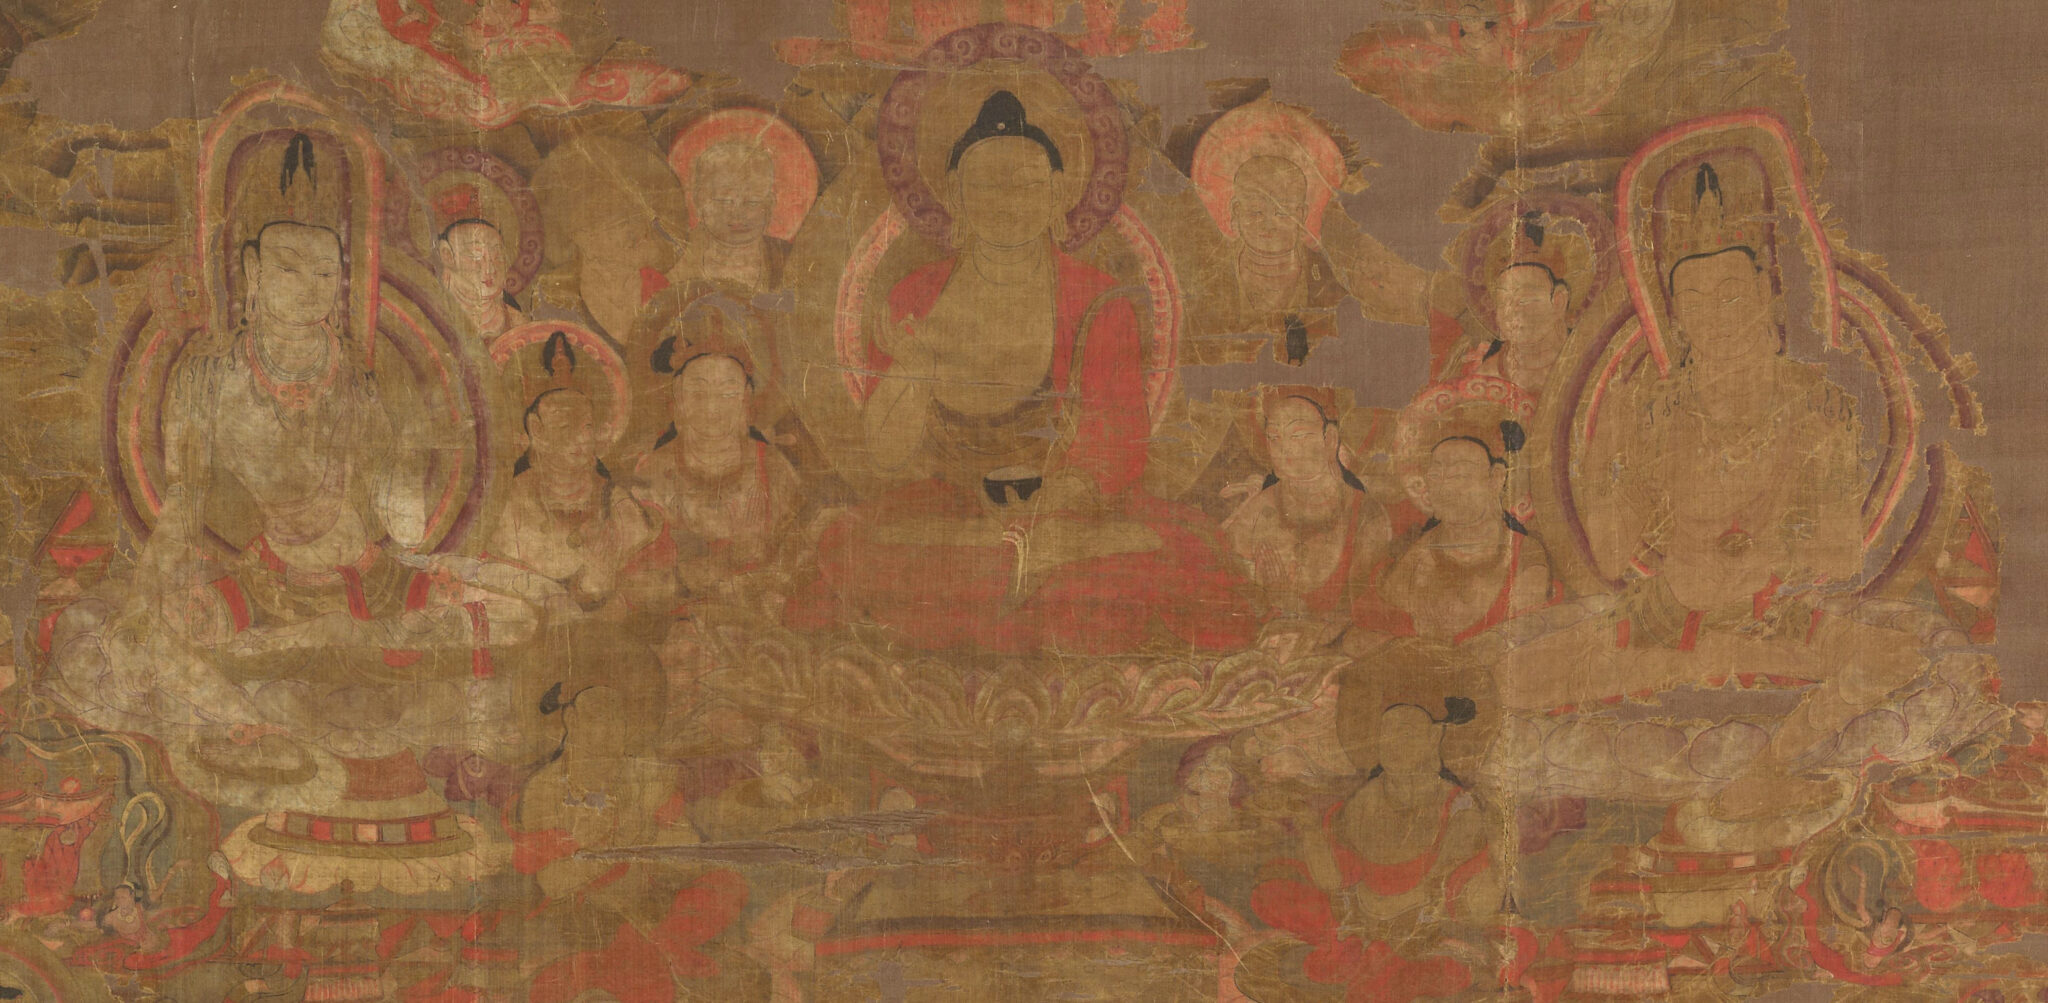 Detail of painting in oranges, reds, and yellows depicting three deities seated on pedestals in front of attendants